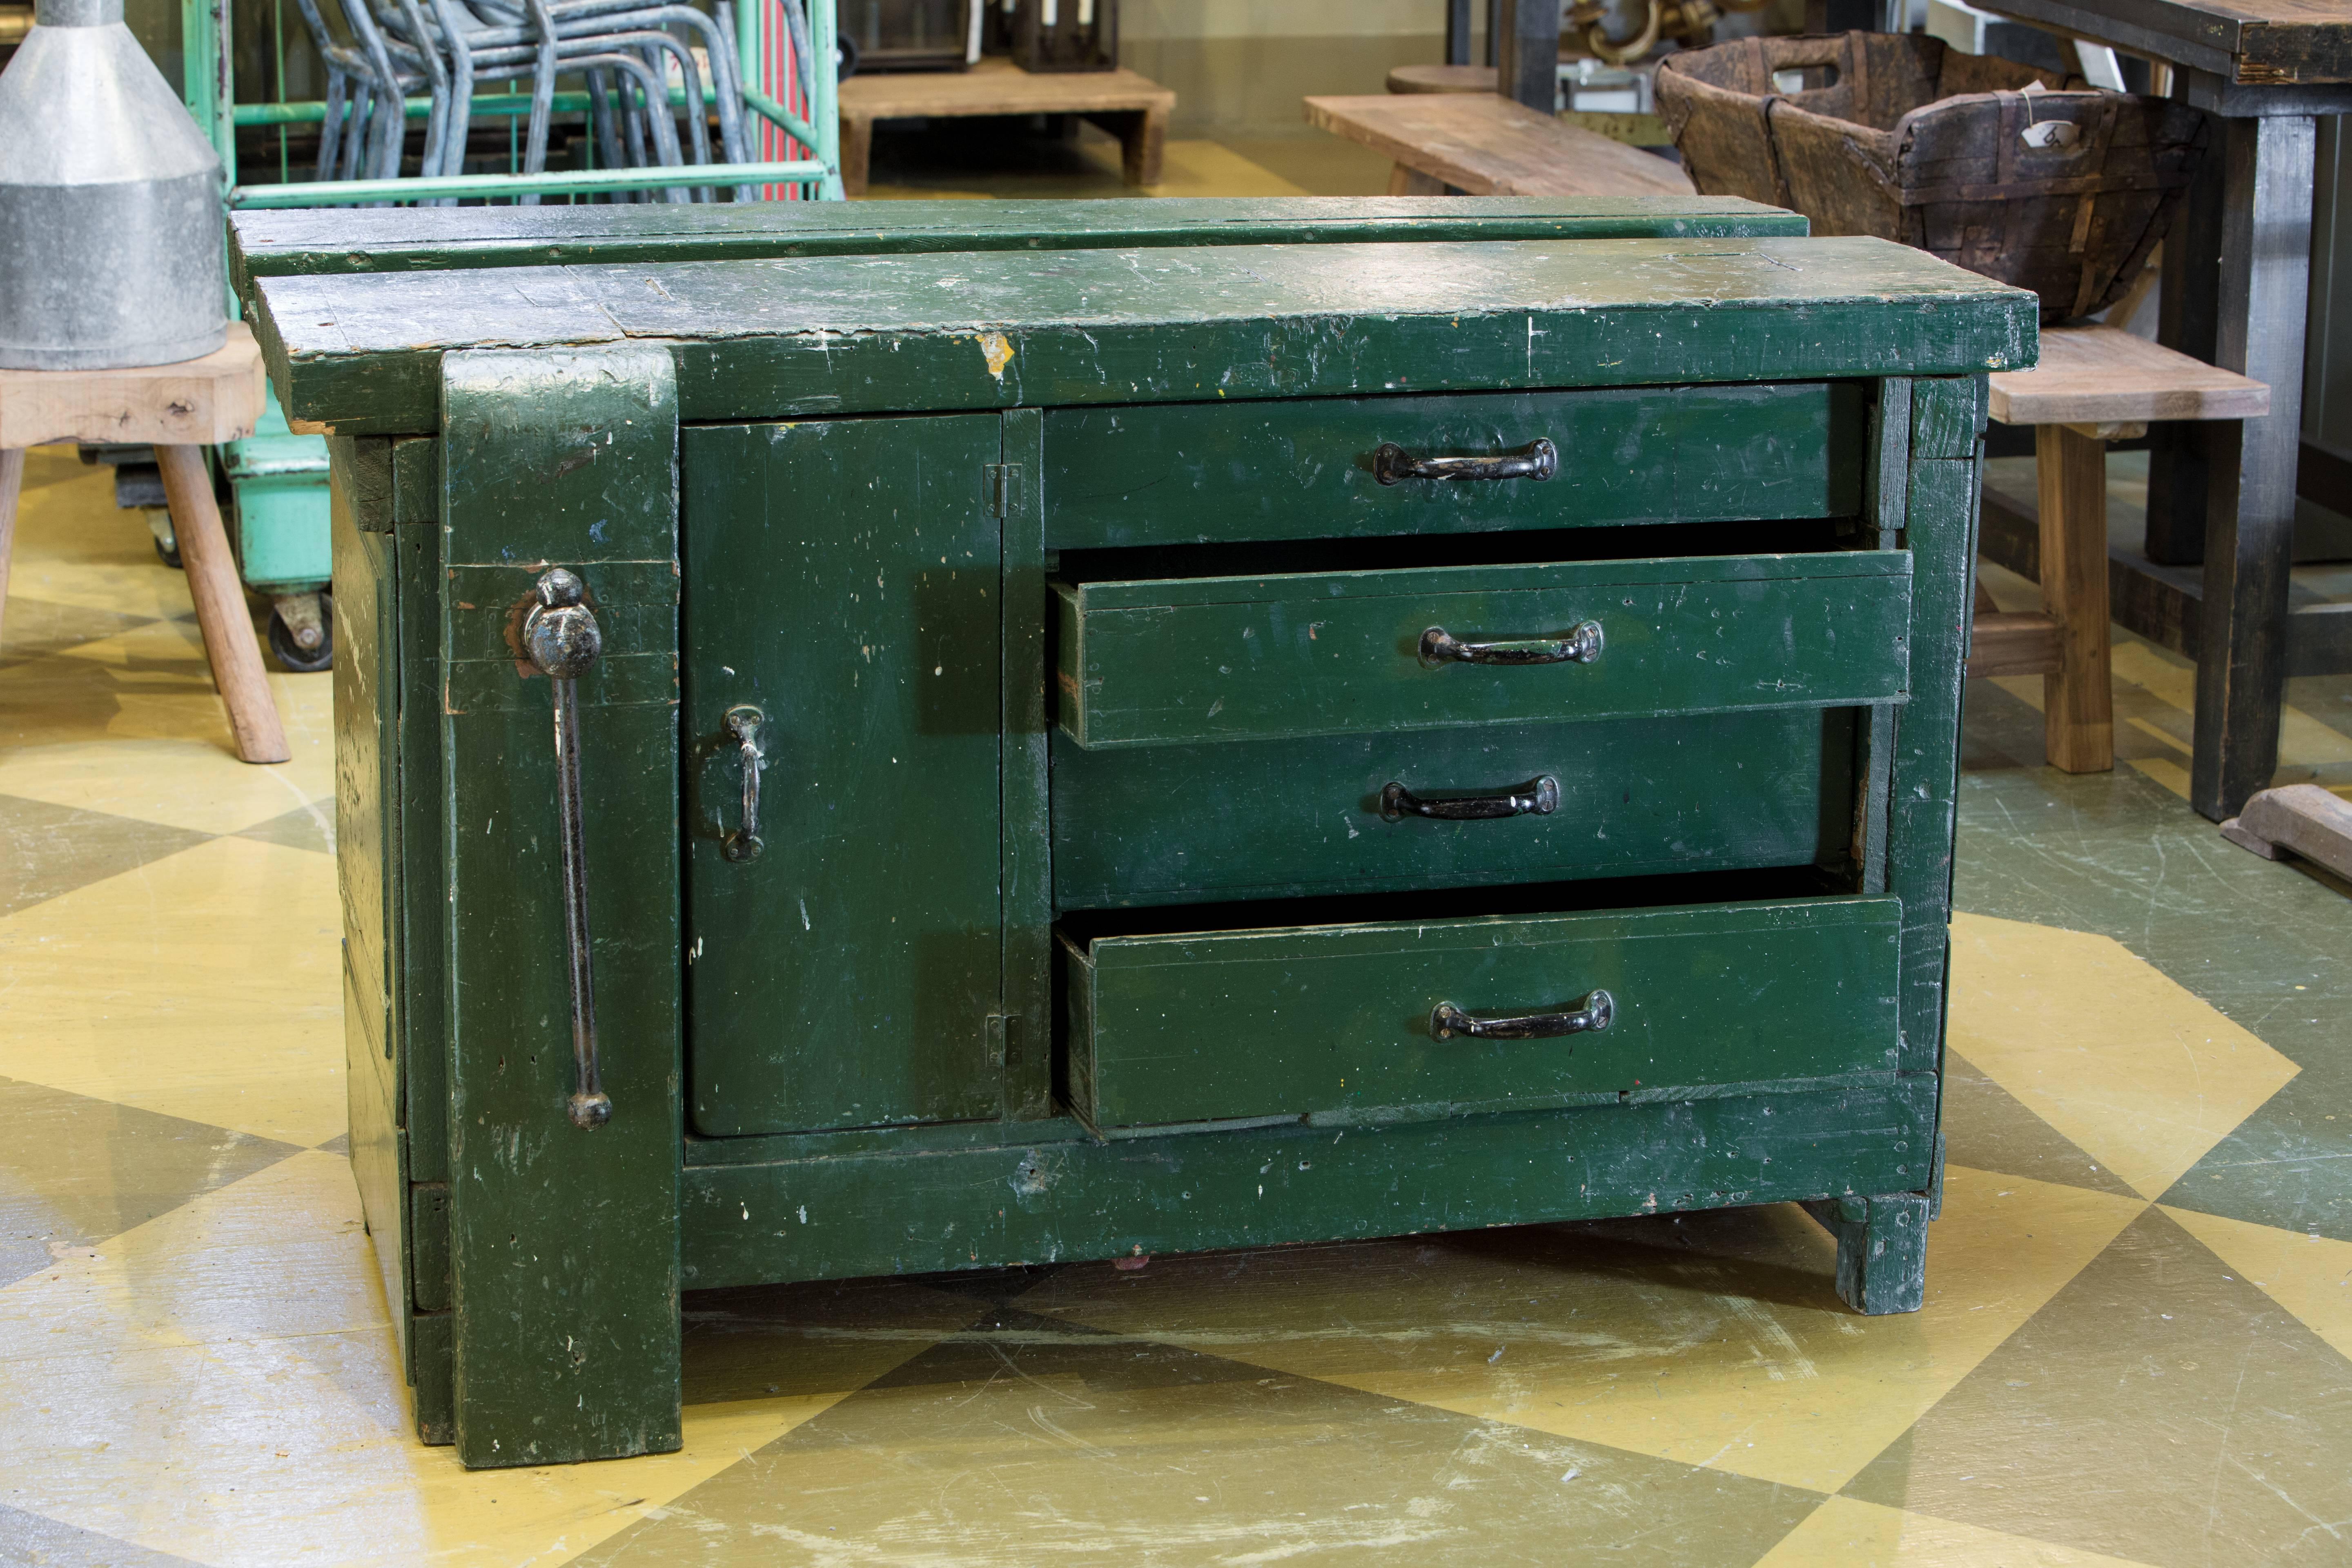 Belgian wooden work table/storage cabinet with original green paint, circa 1920. Four drawers, one cabinet. Original hardware and clamp. Top drawer has a divided section. Additional photos upon request.